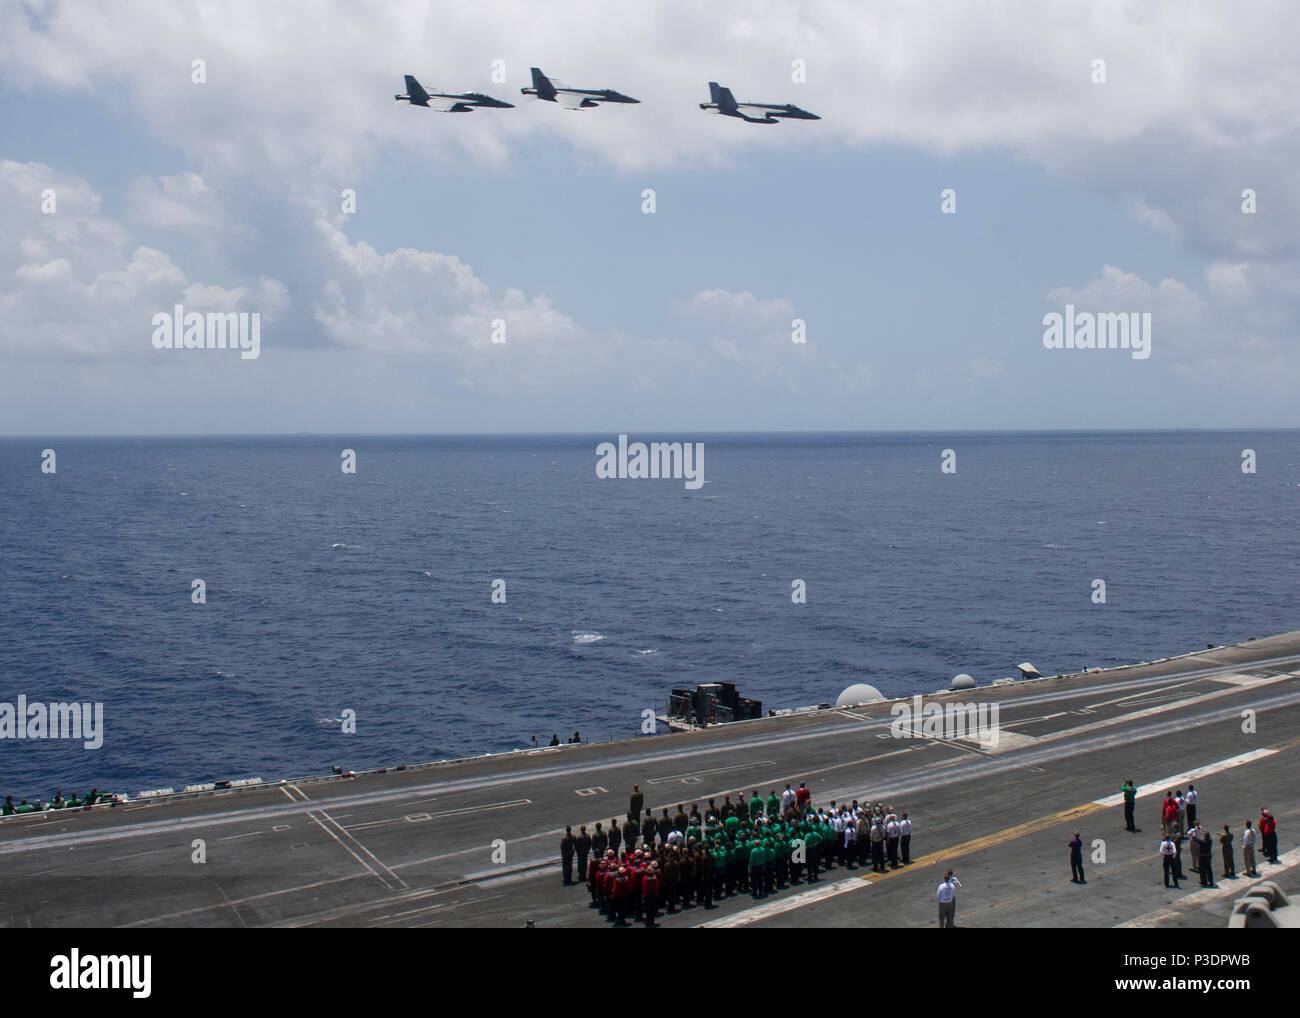 180616-N-UJ486-0386 MEDITERRANEAN SEA (June 16, 2018) F/A-18 Super Hornets perform a fly-by during a change of command ceremony for Strike Fighter Squadron (VFA) 81 aboard USS Harry S. Truman (CVN 75) June 16, 2018. Harry. S. Truman is currently deployed as part of an ongoing rotation of U.S. forces supporting maritime security operations in international waters around the globe. (U.S. Navy photo by Mass Communication Specialist 2nd Class Rebekah A. Watkins/Released) Stock Photo